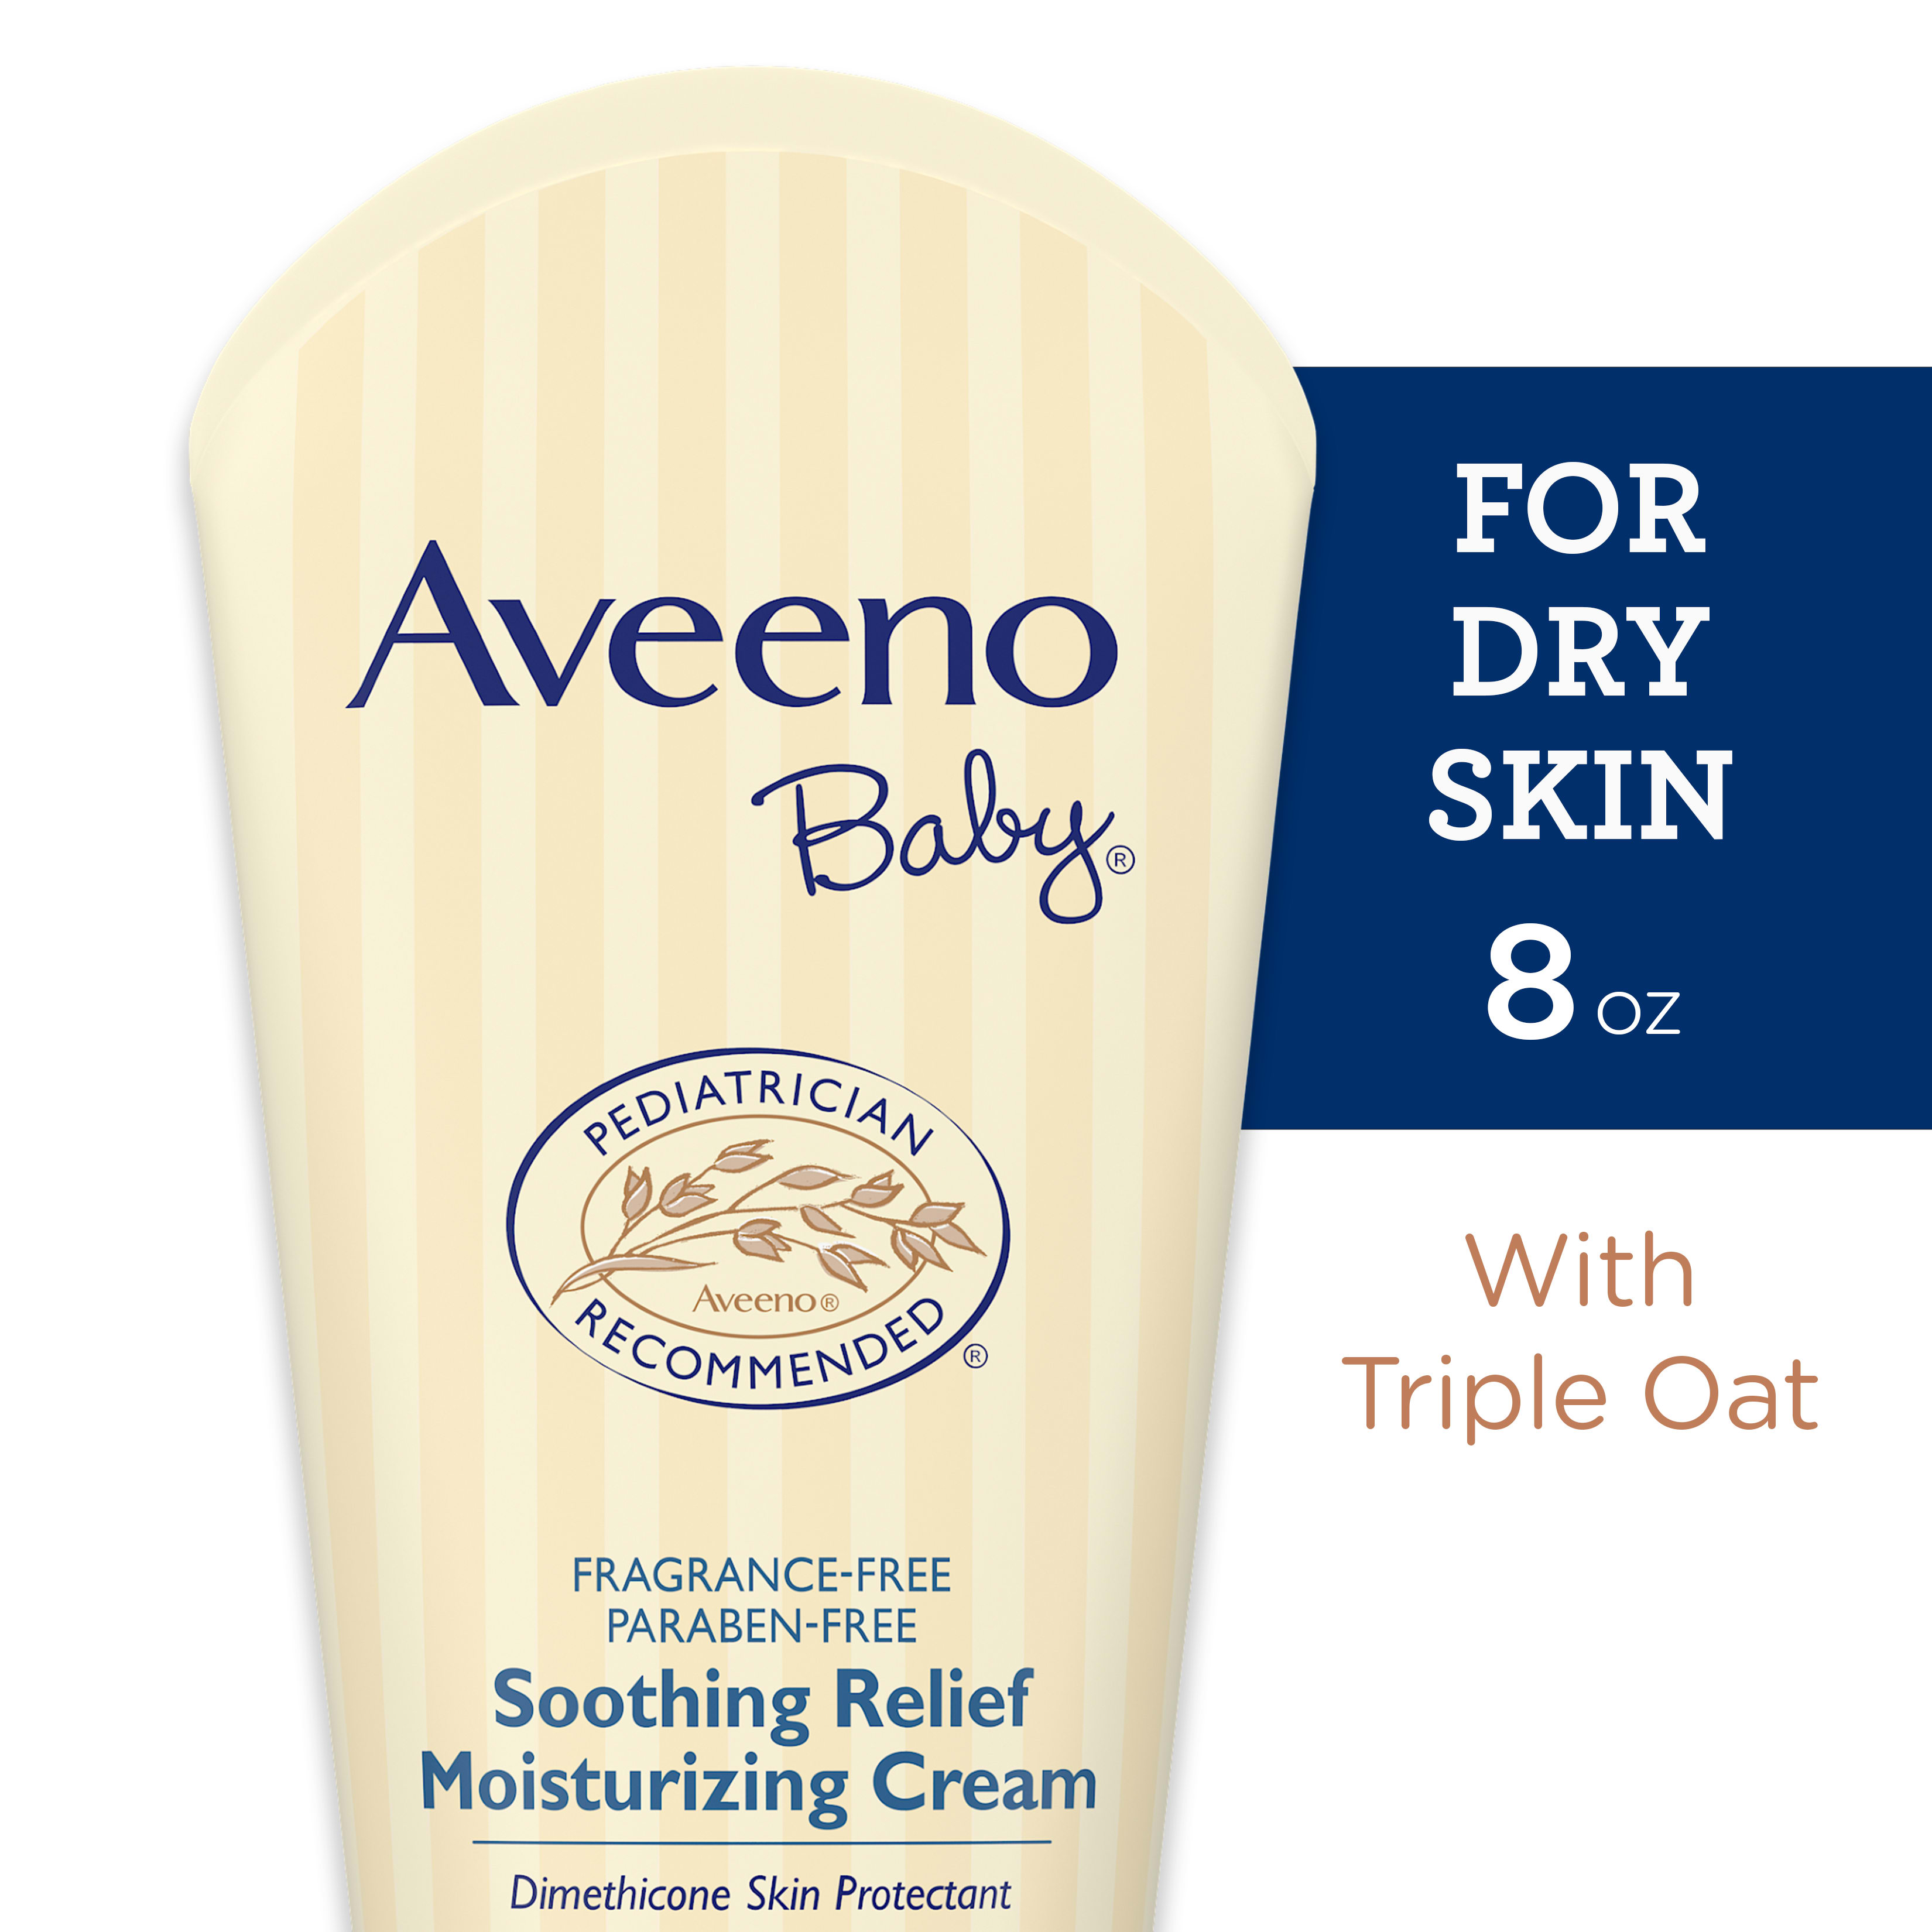 Aveeno Baby Soothing Relief Moisturizing Cream, Oat Complex, 8 oz - image 1 of 14